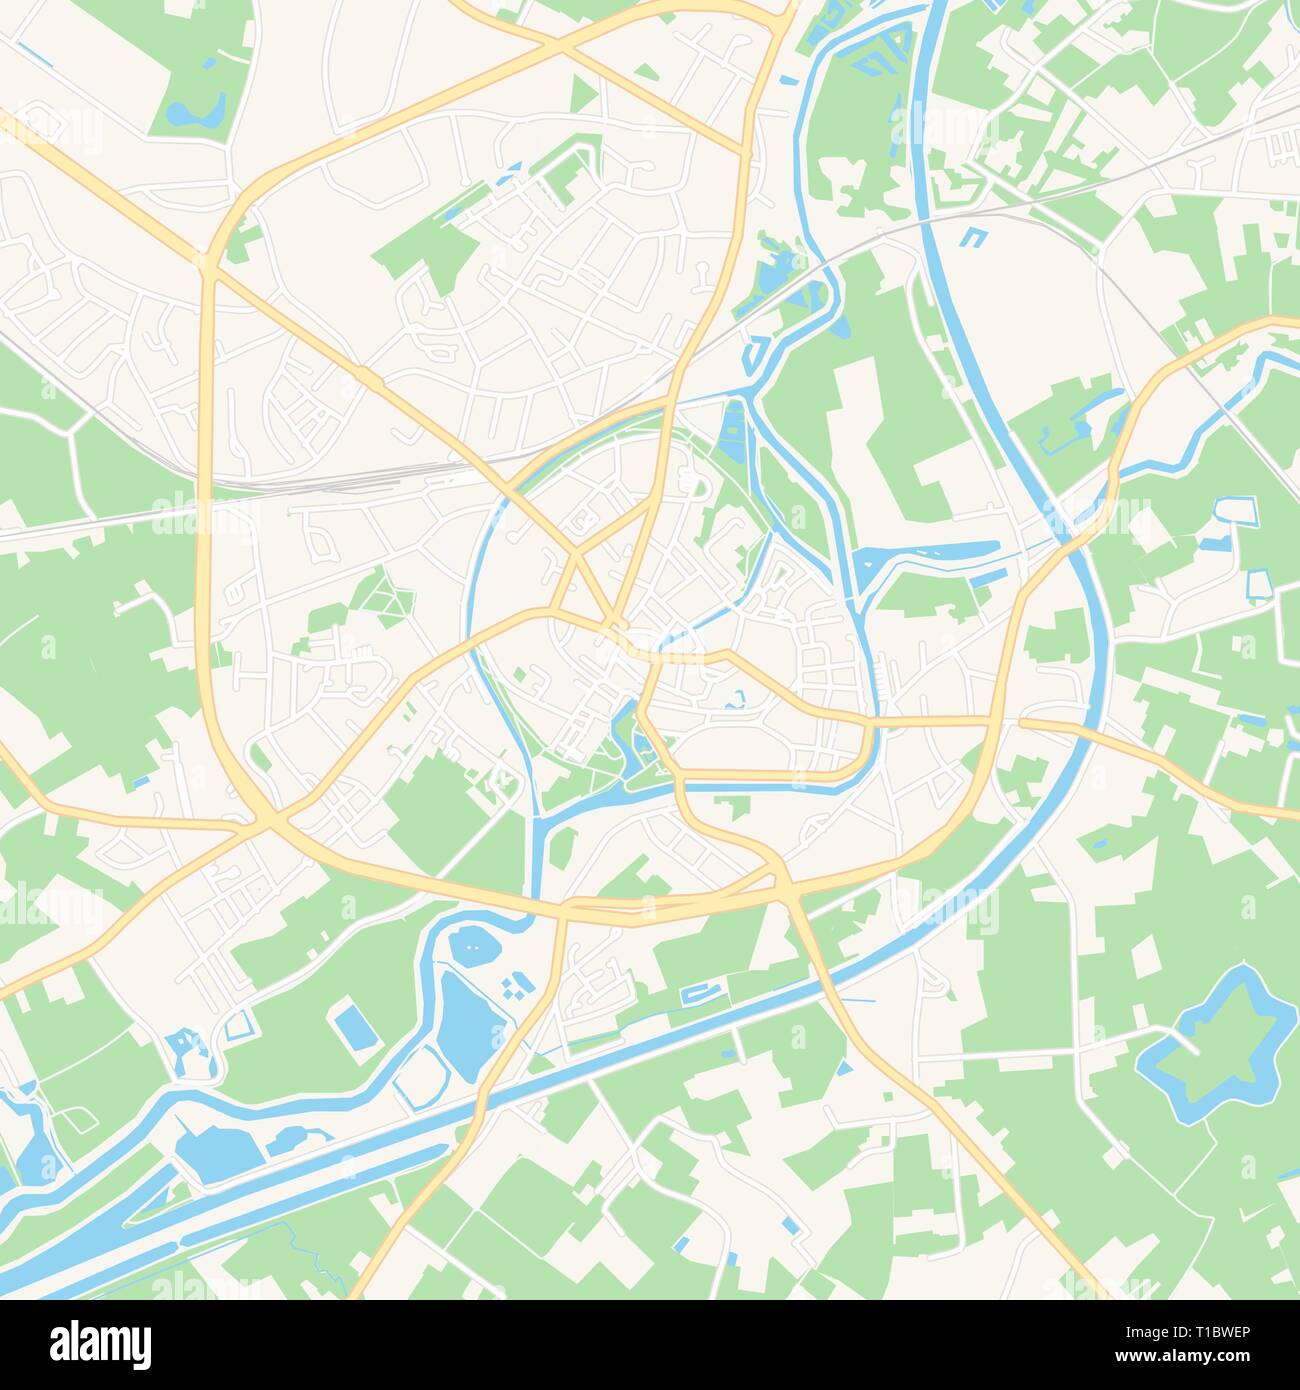 Printable map of Lier , Belgium with main and secondary roads and larger railways. This map is carefully designed for routing and placing individual d Stock Vector